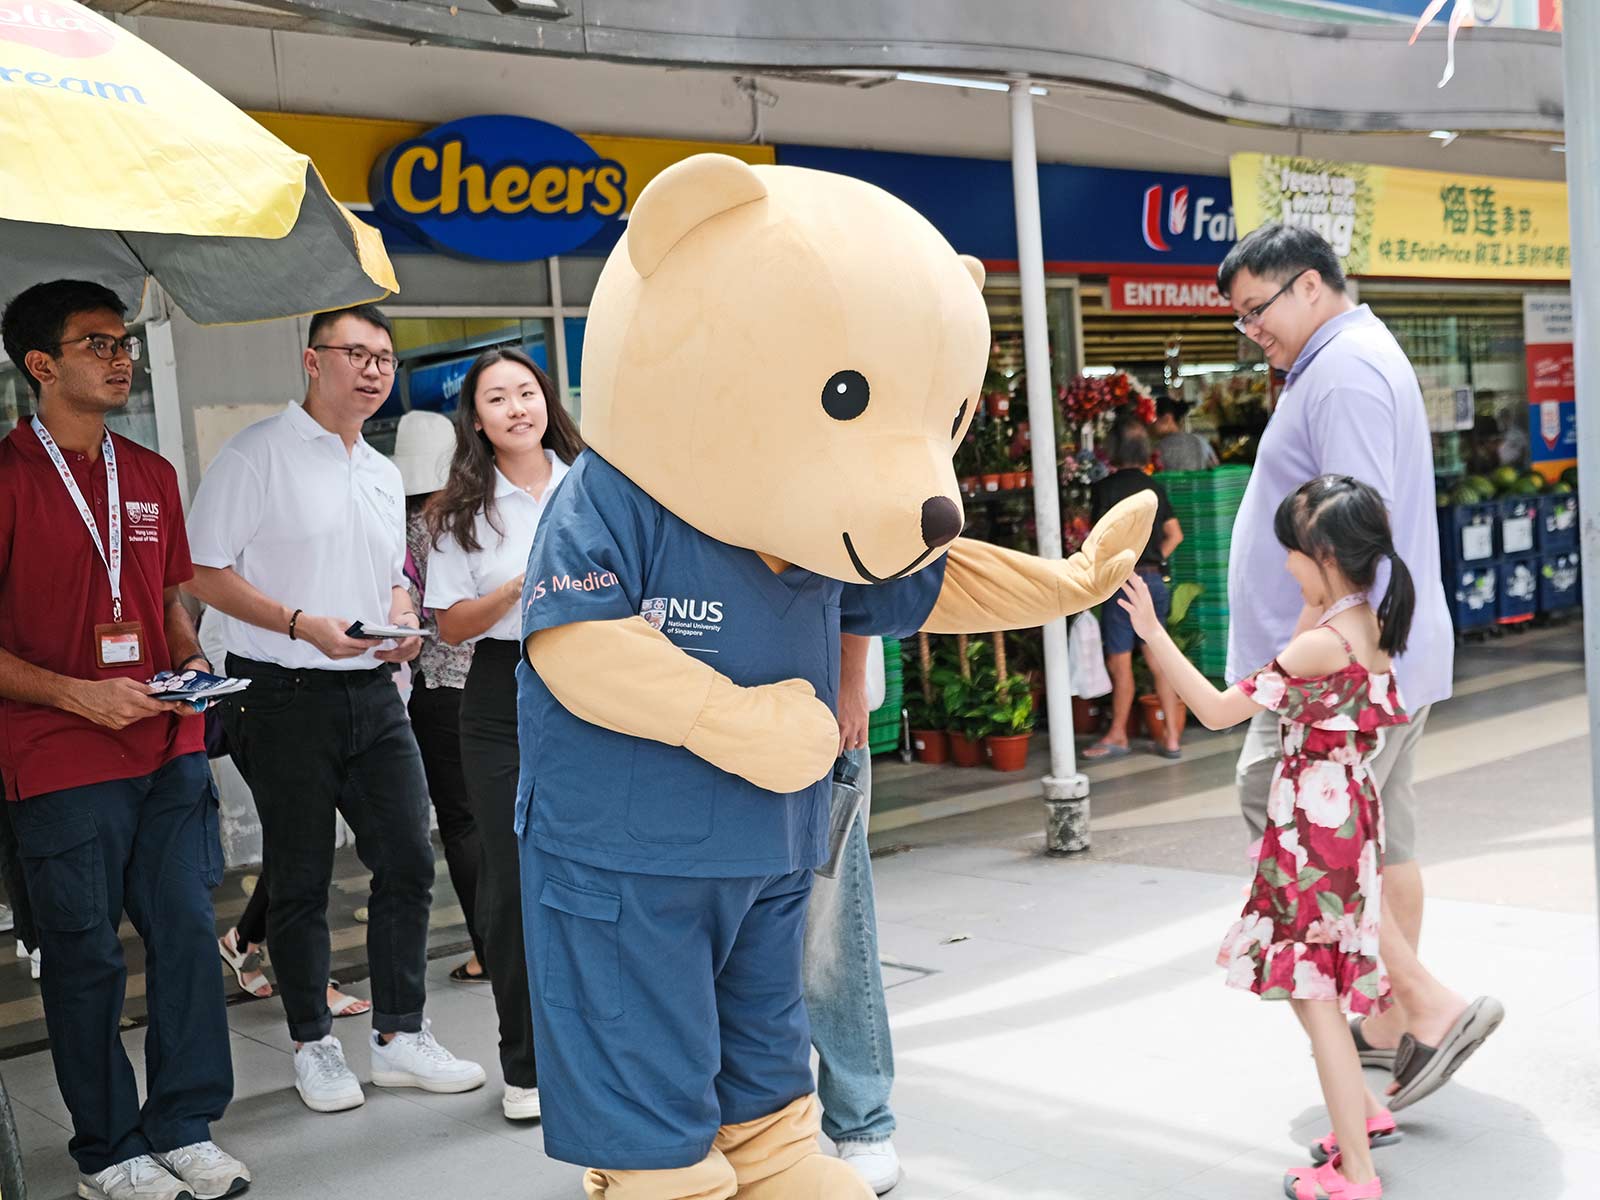 Meddy, the mascot of NUS Medicine, made his rounds around the neighbourhood during the screening event.